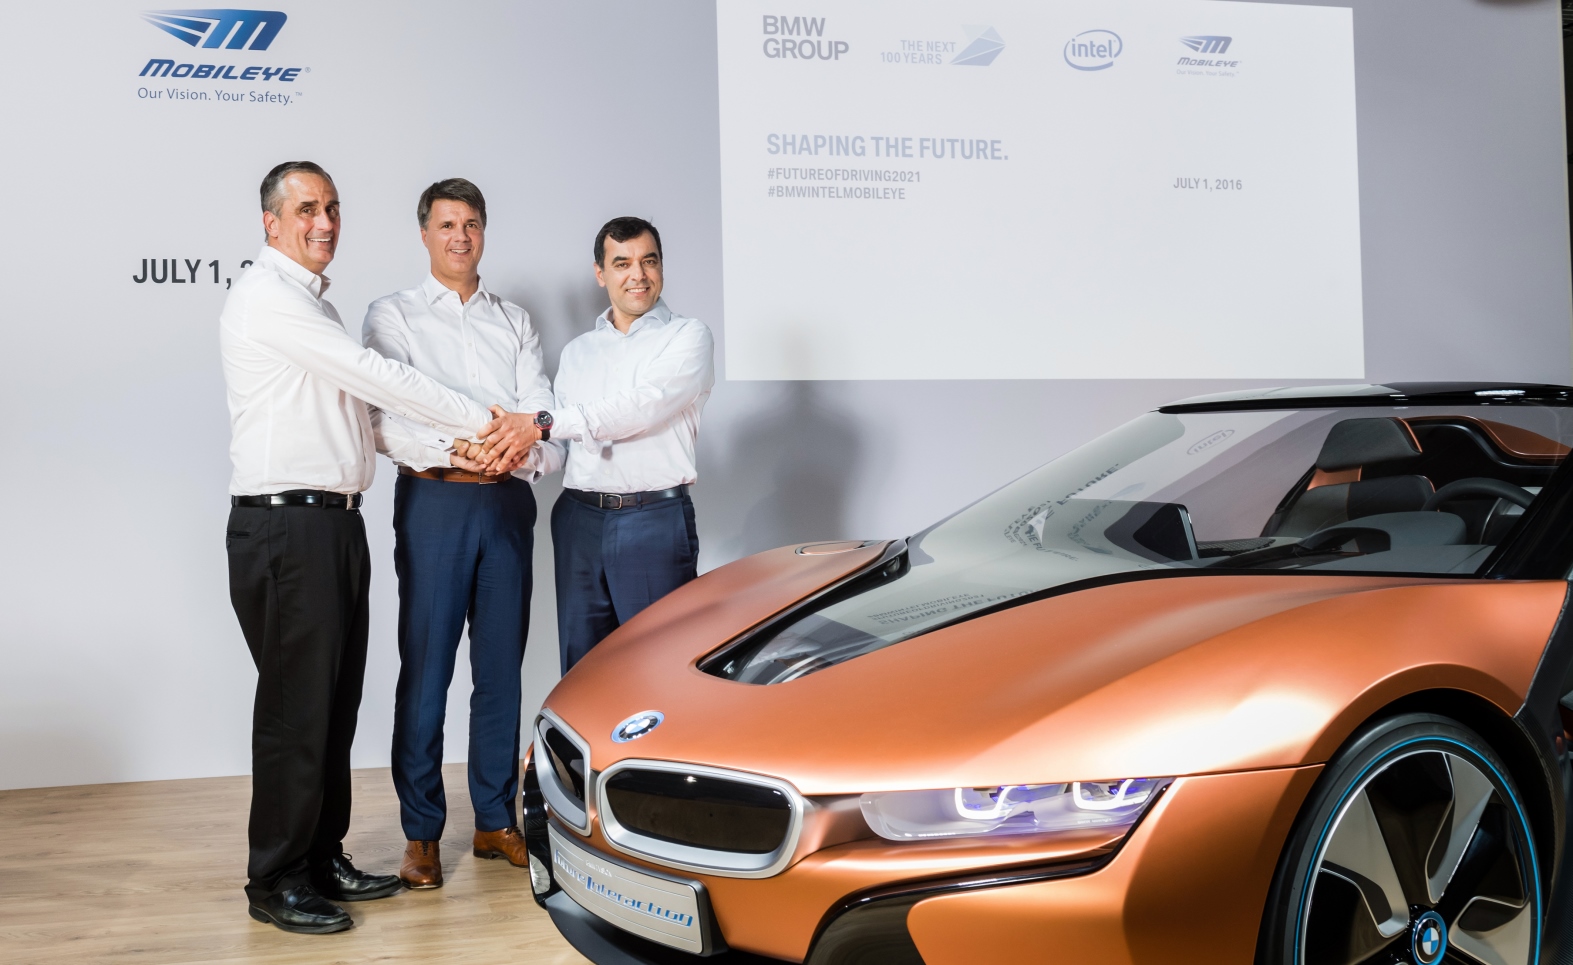 From left, Intel CEO Brian Krzanich, Chairman of the Board of Management of BMW AG Harald Krüger and Mobileye Cofounder, Chairman and CTO Prof. Amnon Shashua at a news conference in Munich where they announced their partnership. Photo courtesy of BMW Group